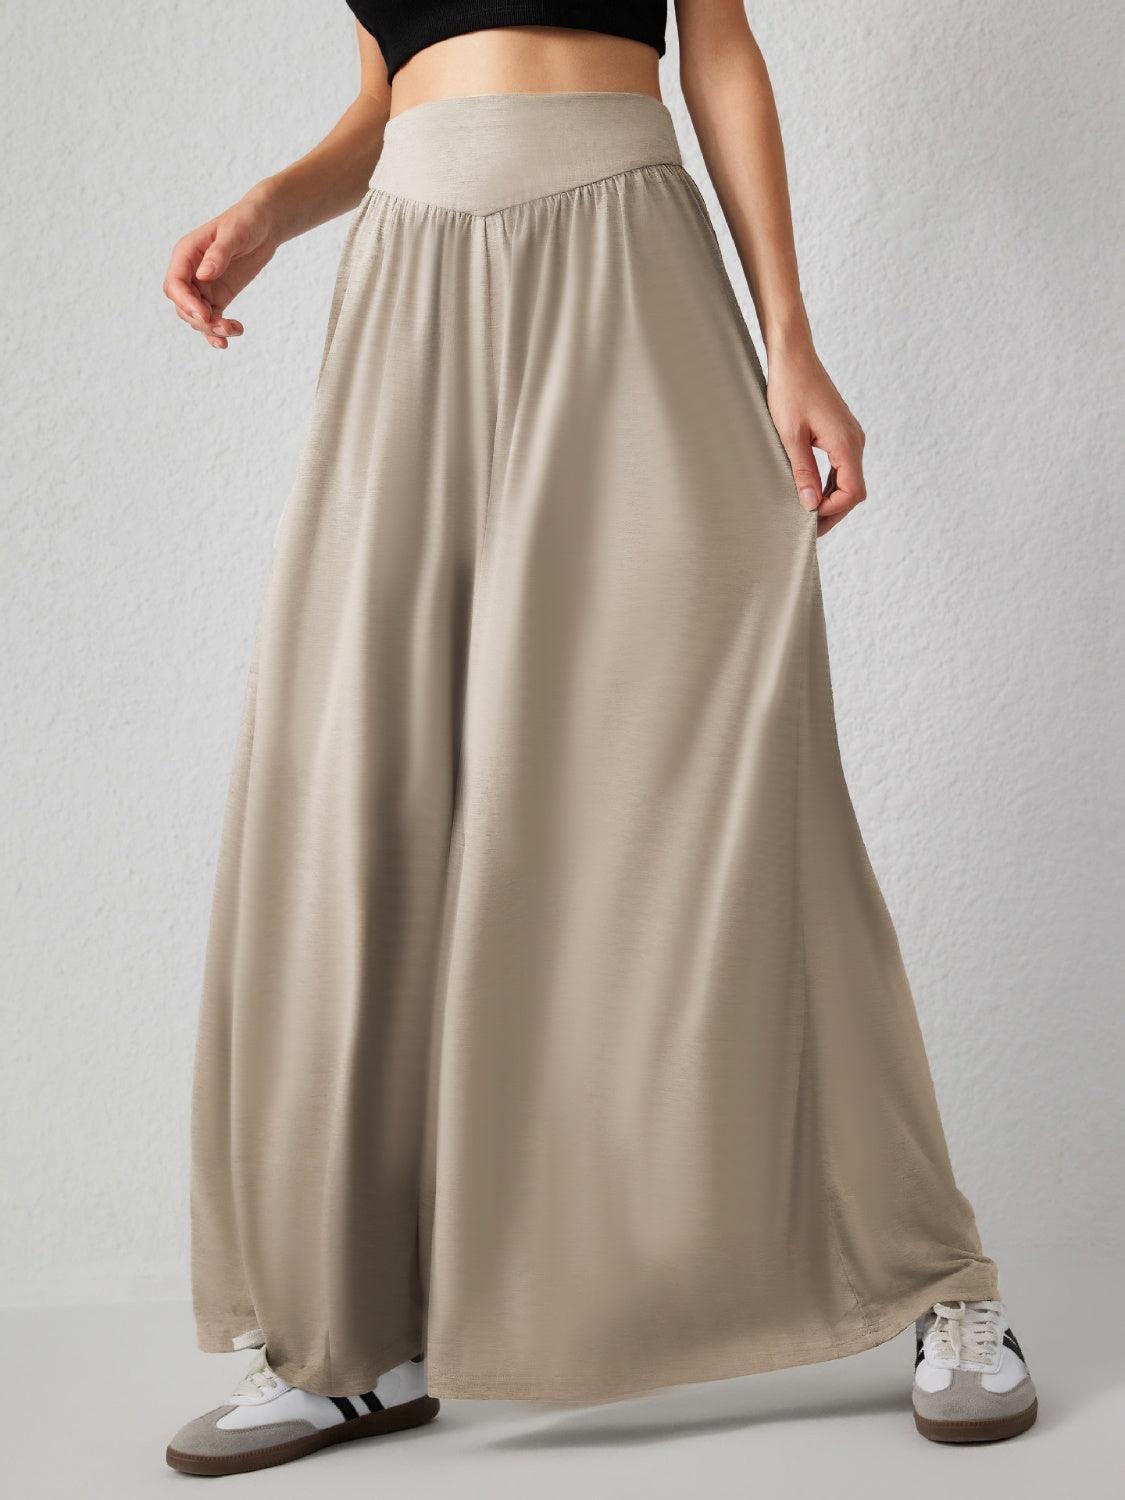 High Waist Wide Leg Pants in 6 Colors - Olive Ave